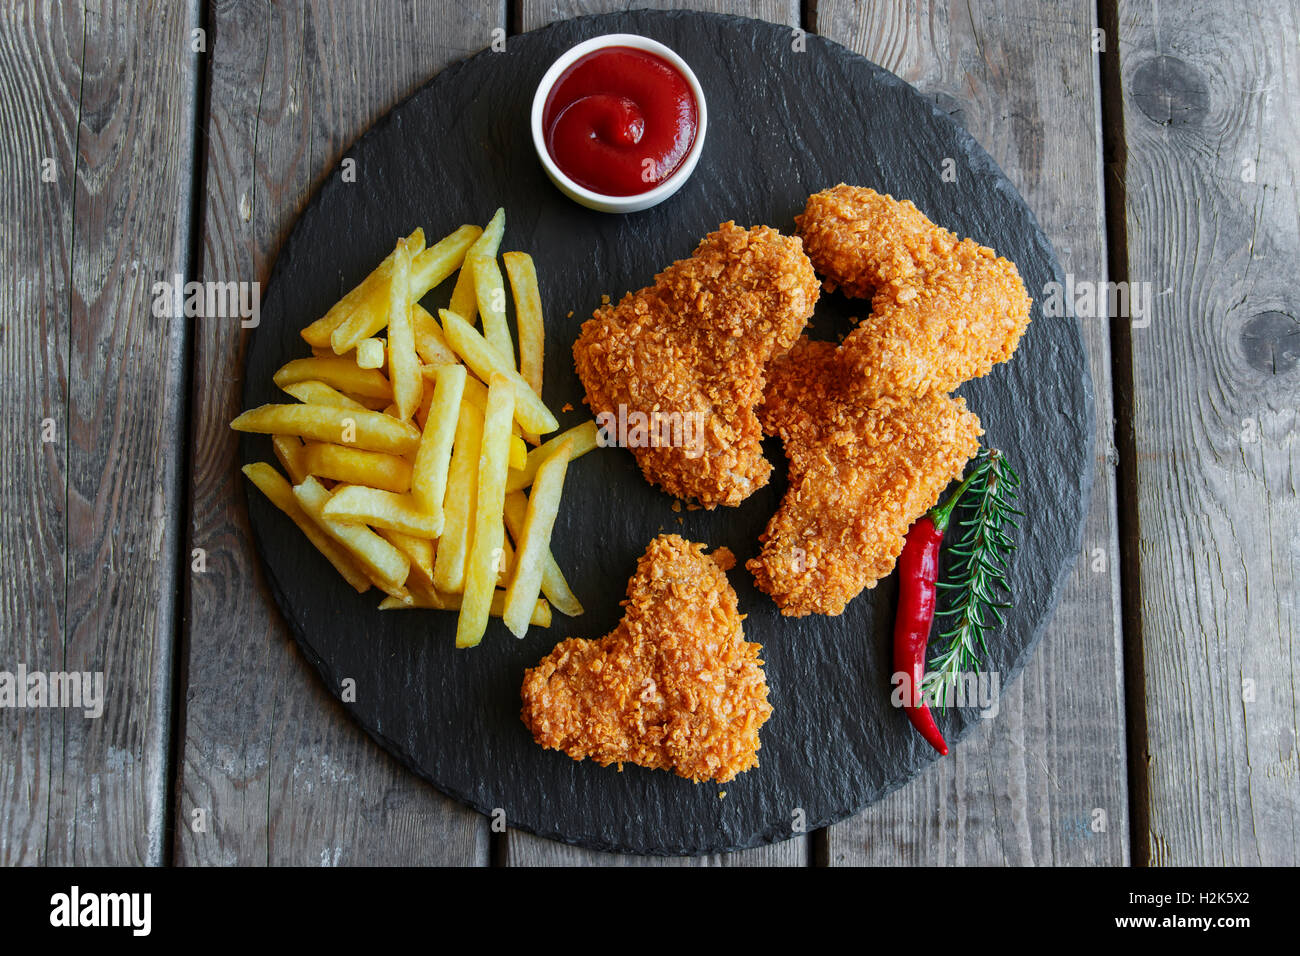 Breaded crispy chicken wing fried french fries sauce Stock Photo